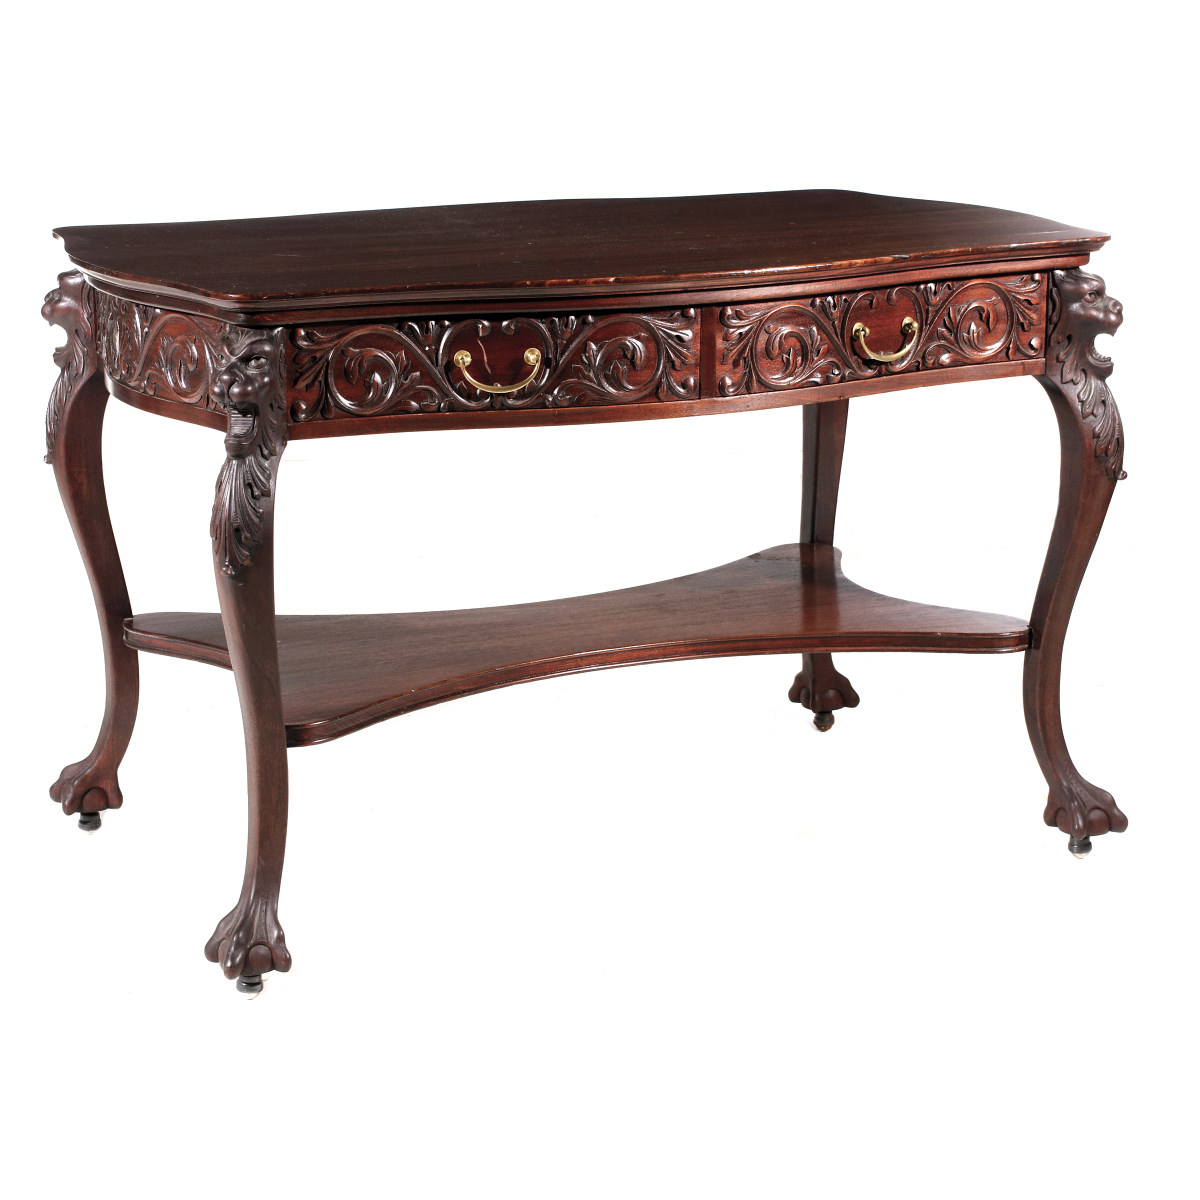 A HIGHLY CARVED MAHOGANY LIBRARY TABLE ATTR HORNER